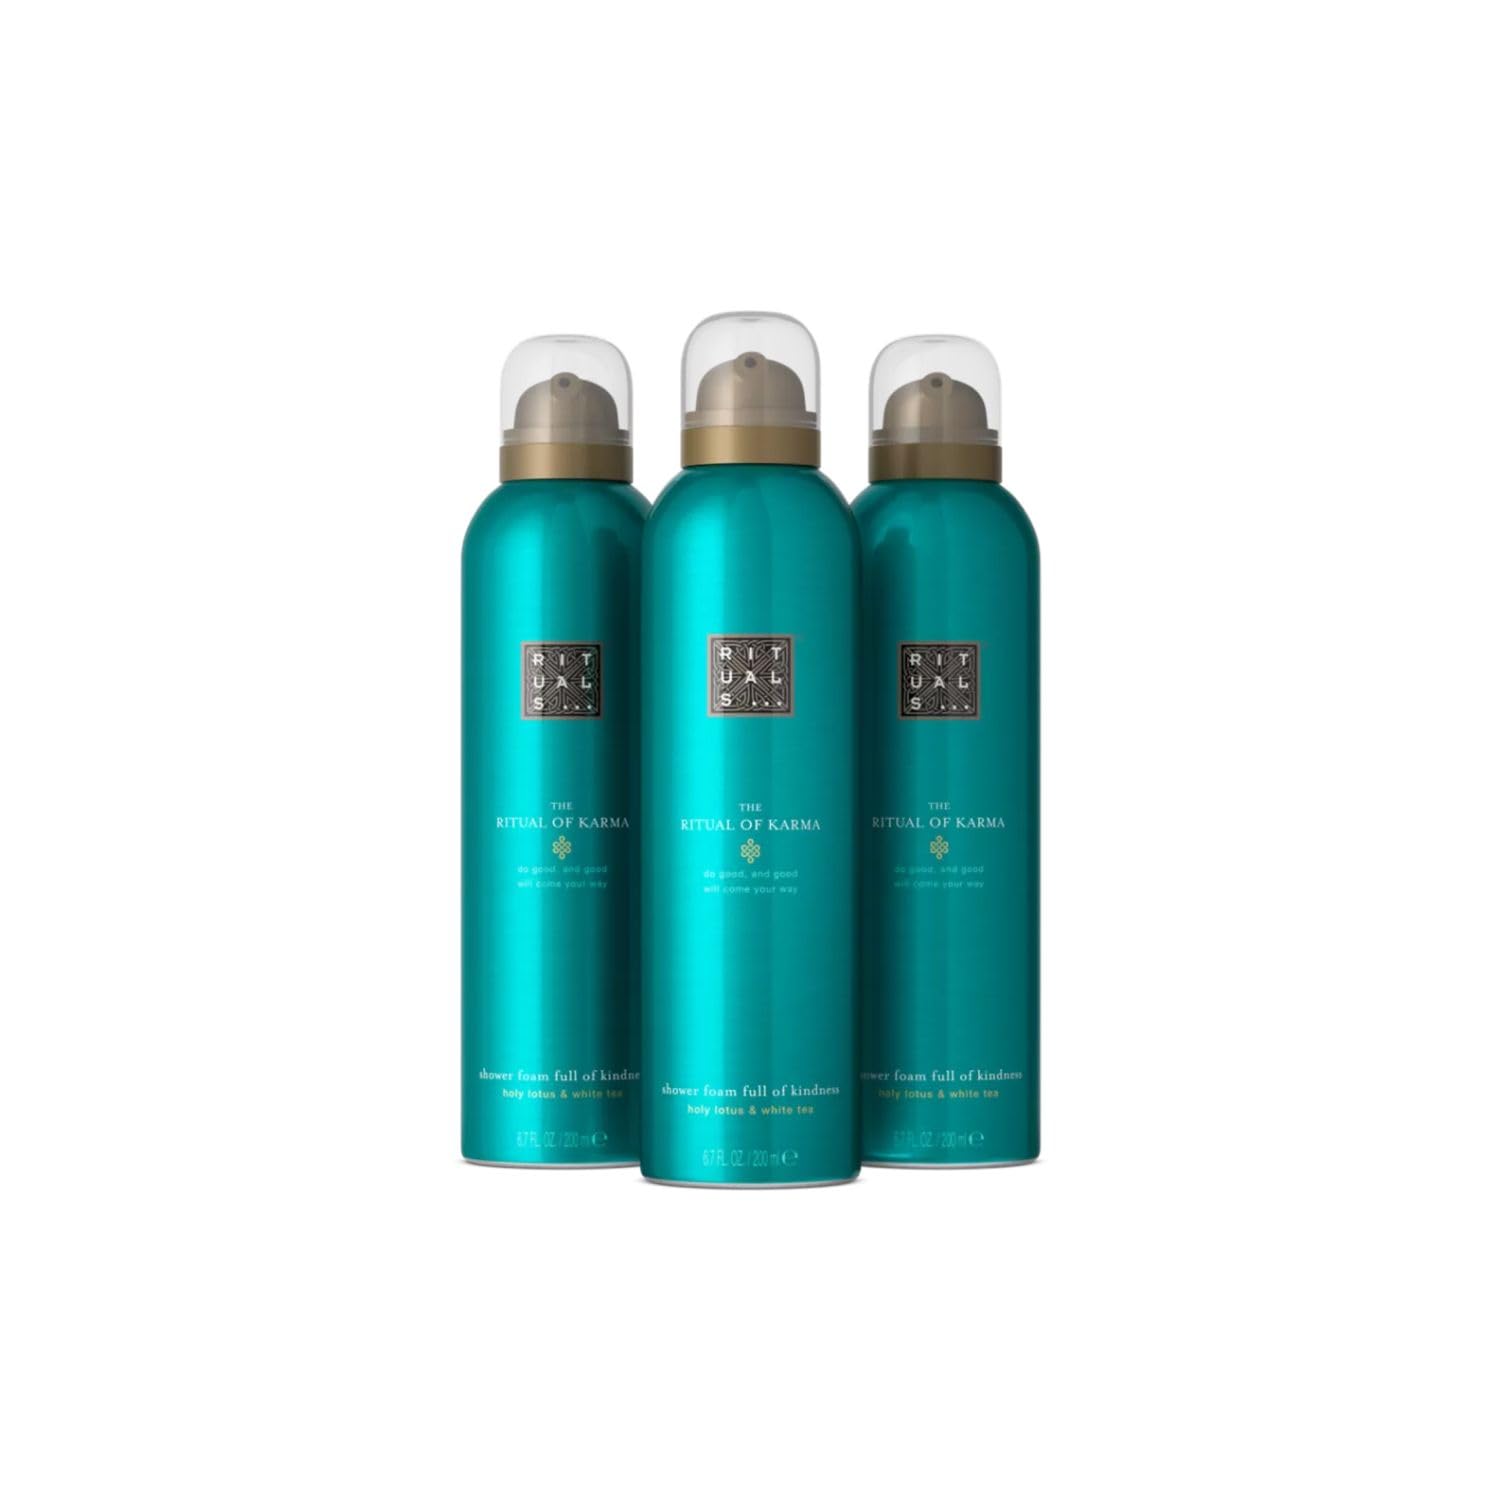 RITUALS The Ritual of Karma Value Pack of 3 Shower Foams - Lotus and White Tea Shower Gel - Soothing and Summer Fragrance - Value Pack 3 x 200ml